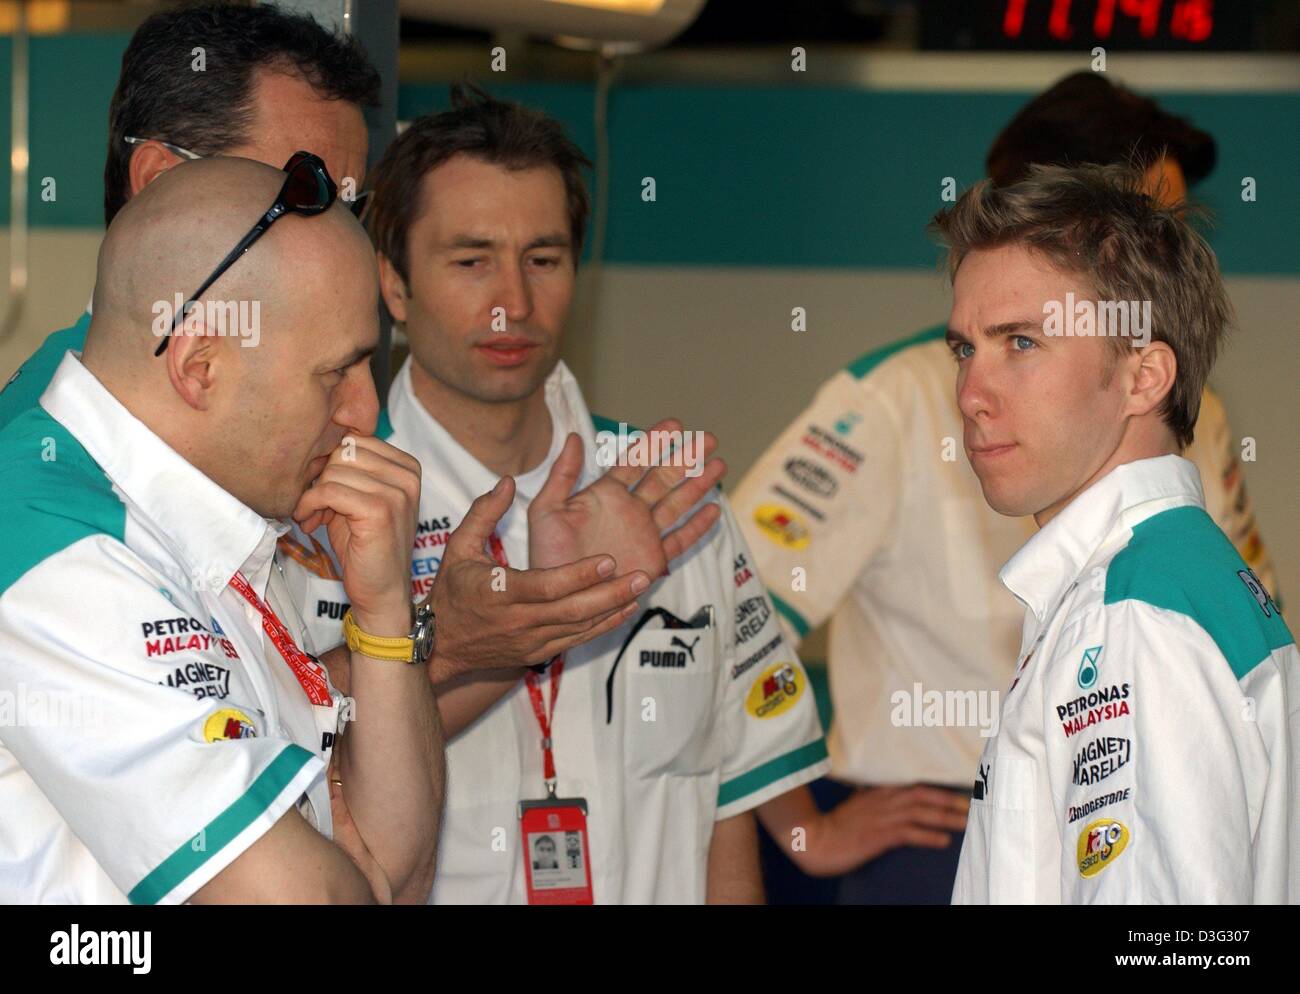 (dpa) - The German formula one pilots Nick Heidfeld (L) and Heinz-Harald Frentzen (C) pictured during a briefing of the Swiss Sauber team on the Albert Park race track in Melbourne, 6 March 2003. The Australian Grand Prix will kick off the formula one season on 9 March 2003 in Melbourne. Stock Photo